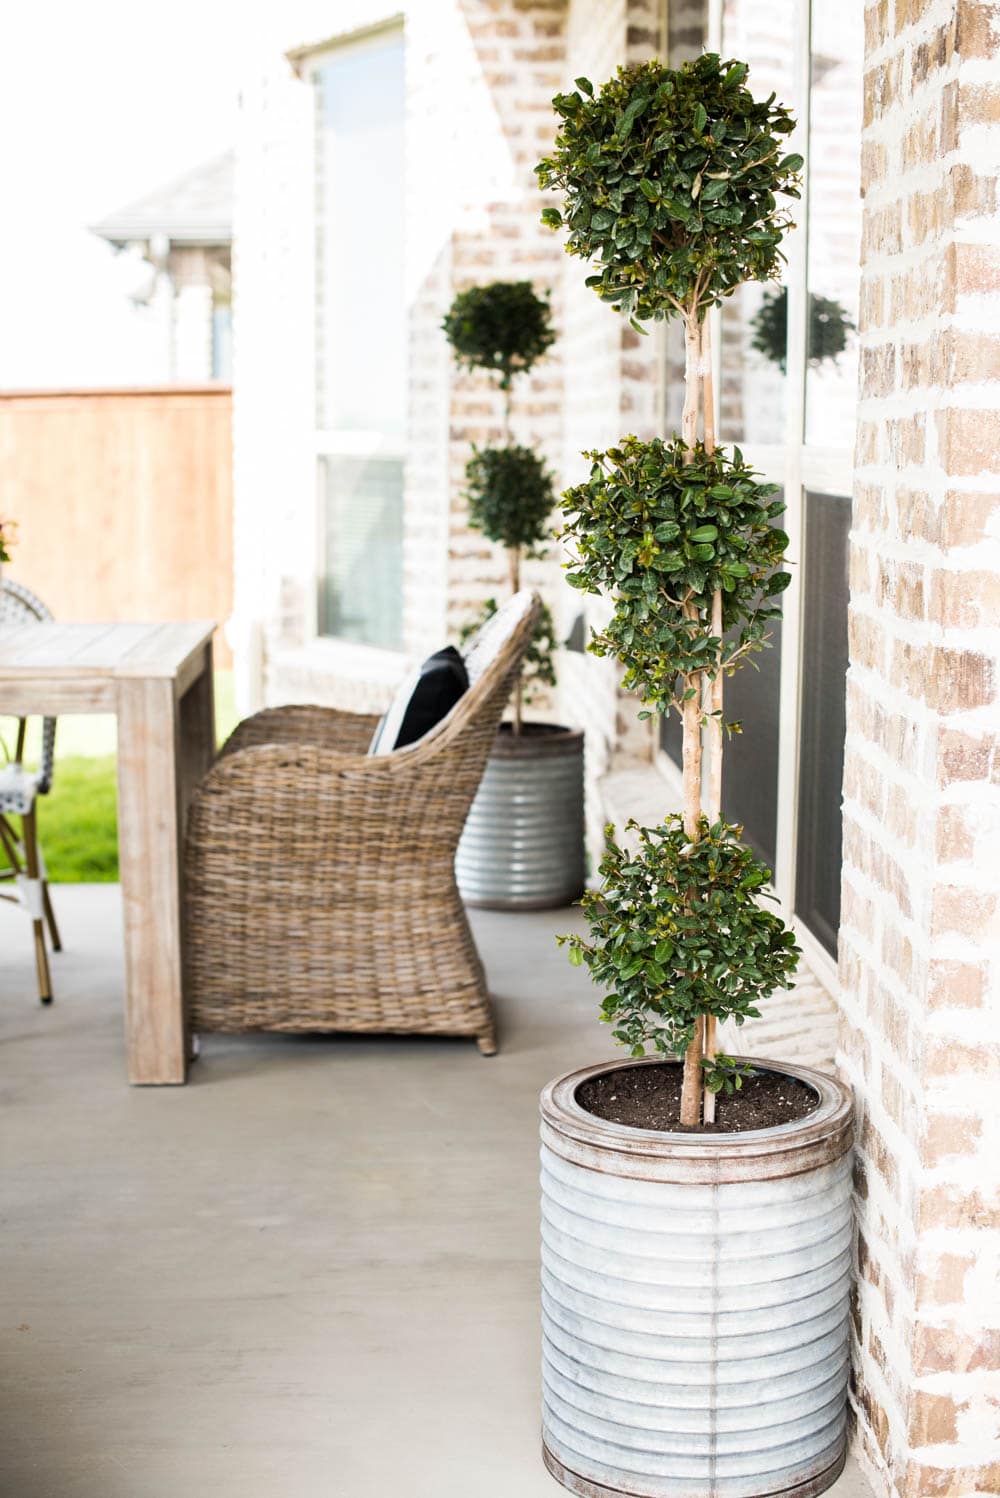 Even if you have a small backyard patio, you can still get big impact with these great tips! #outdoorpatio #backyardideas #patio #backyardideas